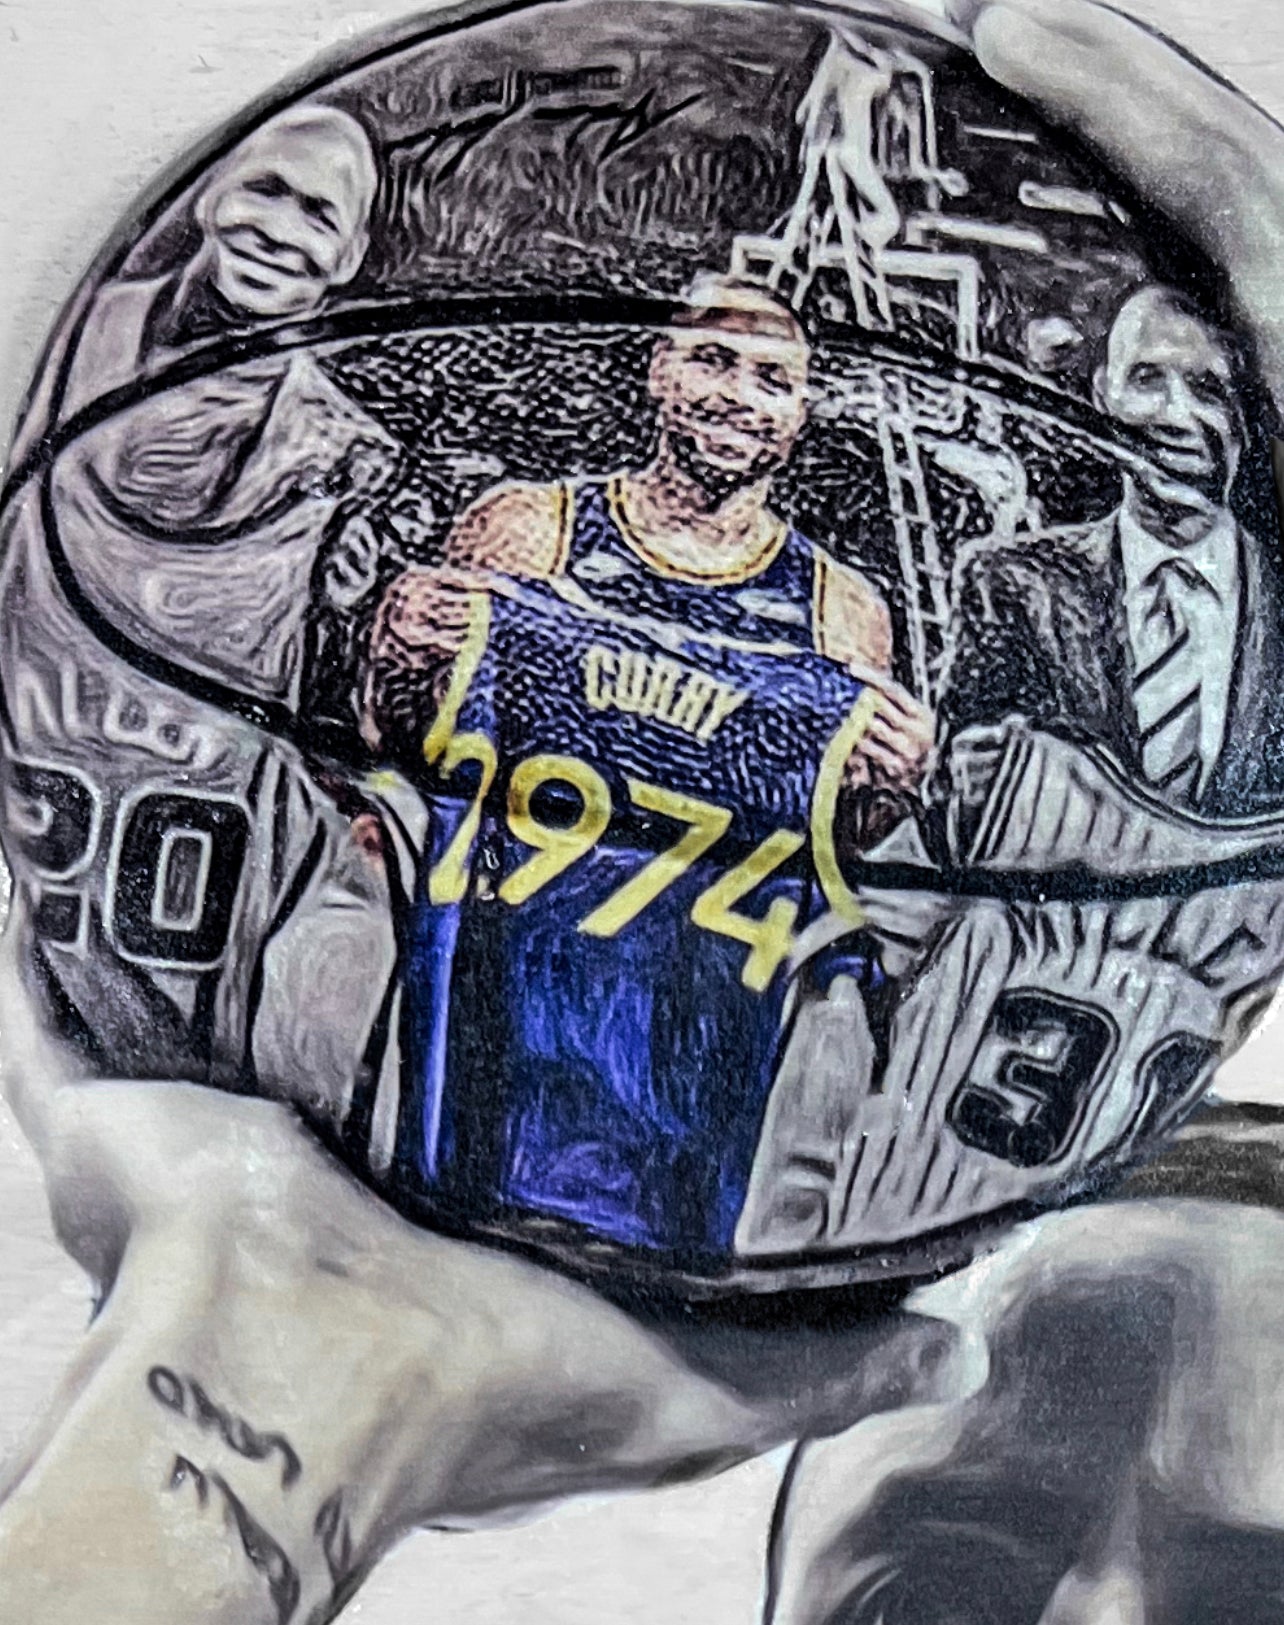 “King of the 3’s" (Steph Curry) - ORIGINAL on Birchwood